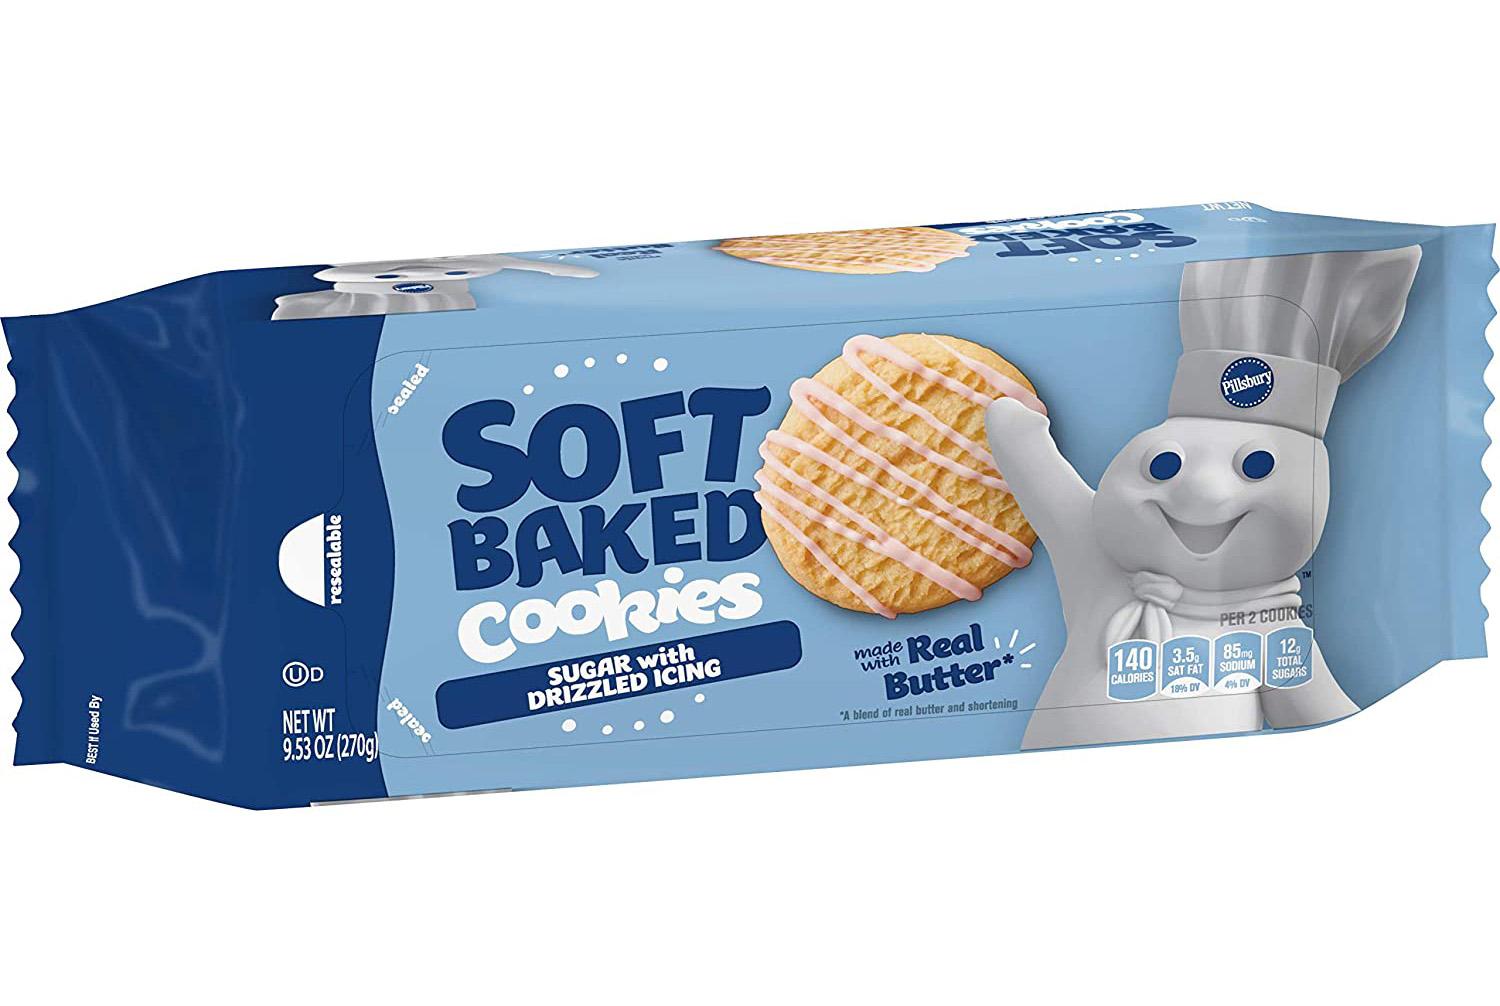 18 Pillsbury Soft Baked Sugar with Drizzled Icing Cookies for $0.98